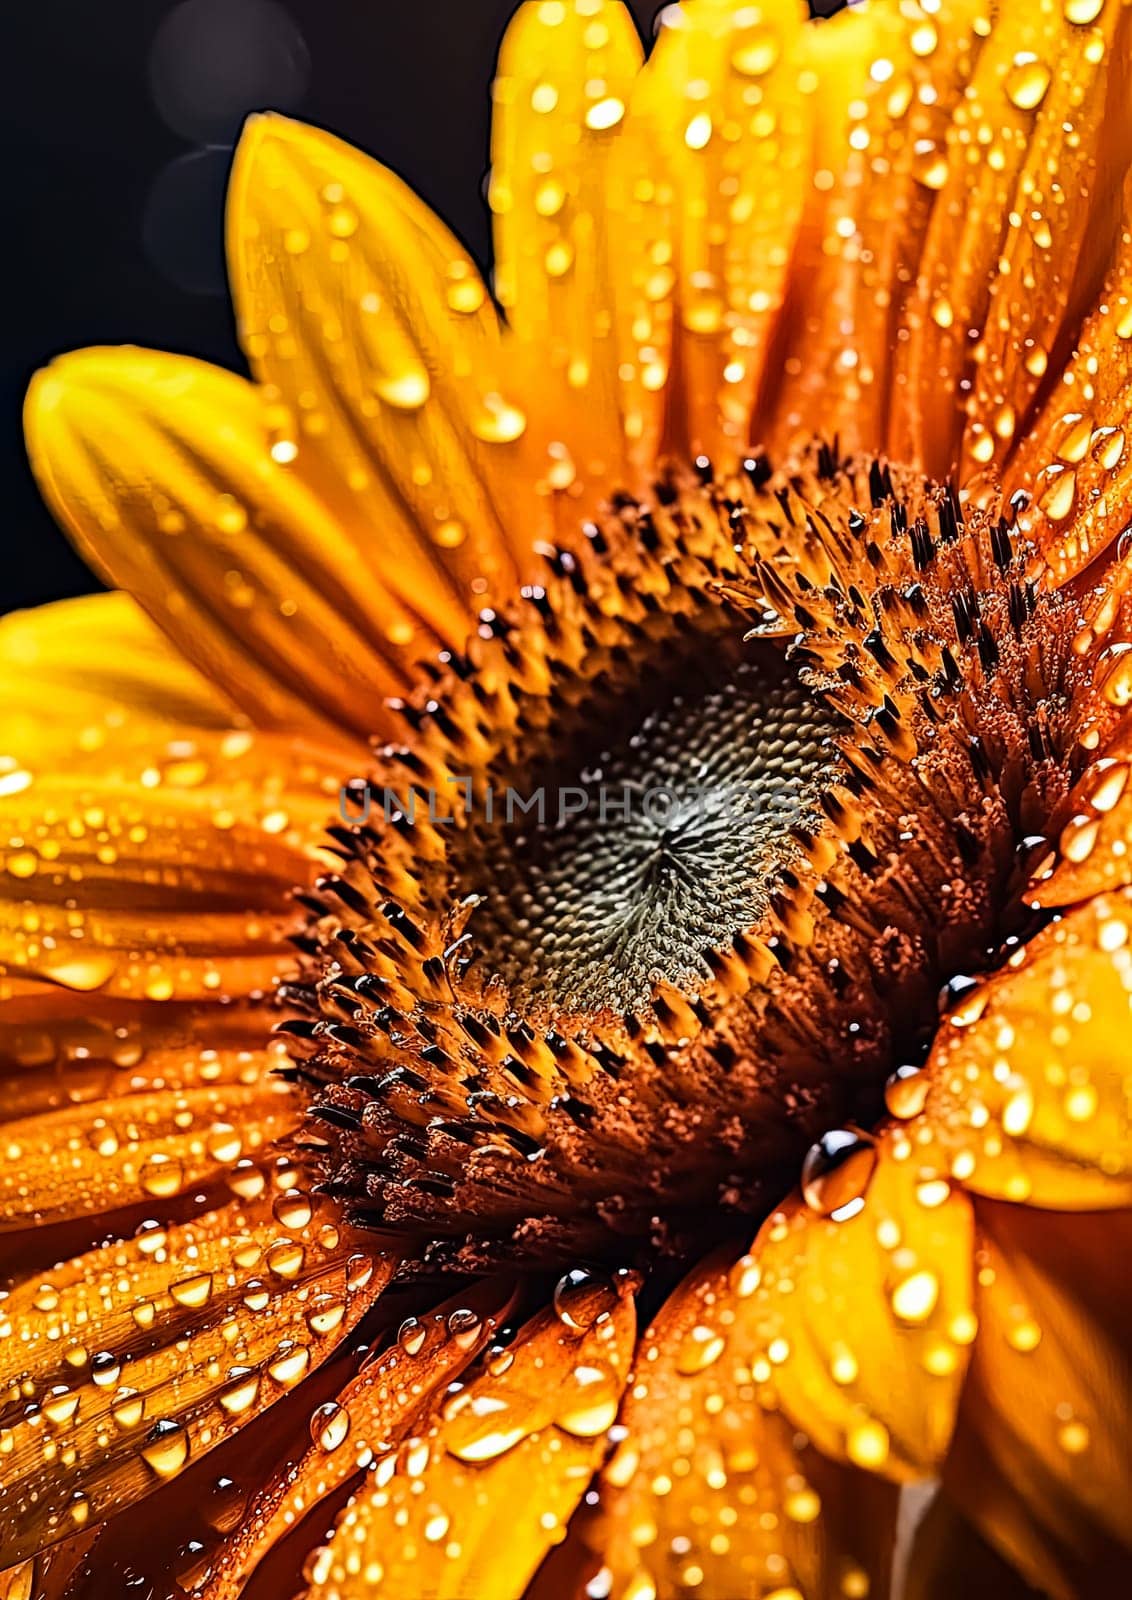 A close up of a yellow flower with water droplets on it by Alla_Morozova93